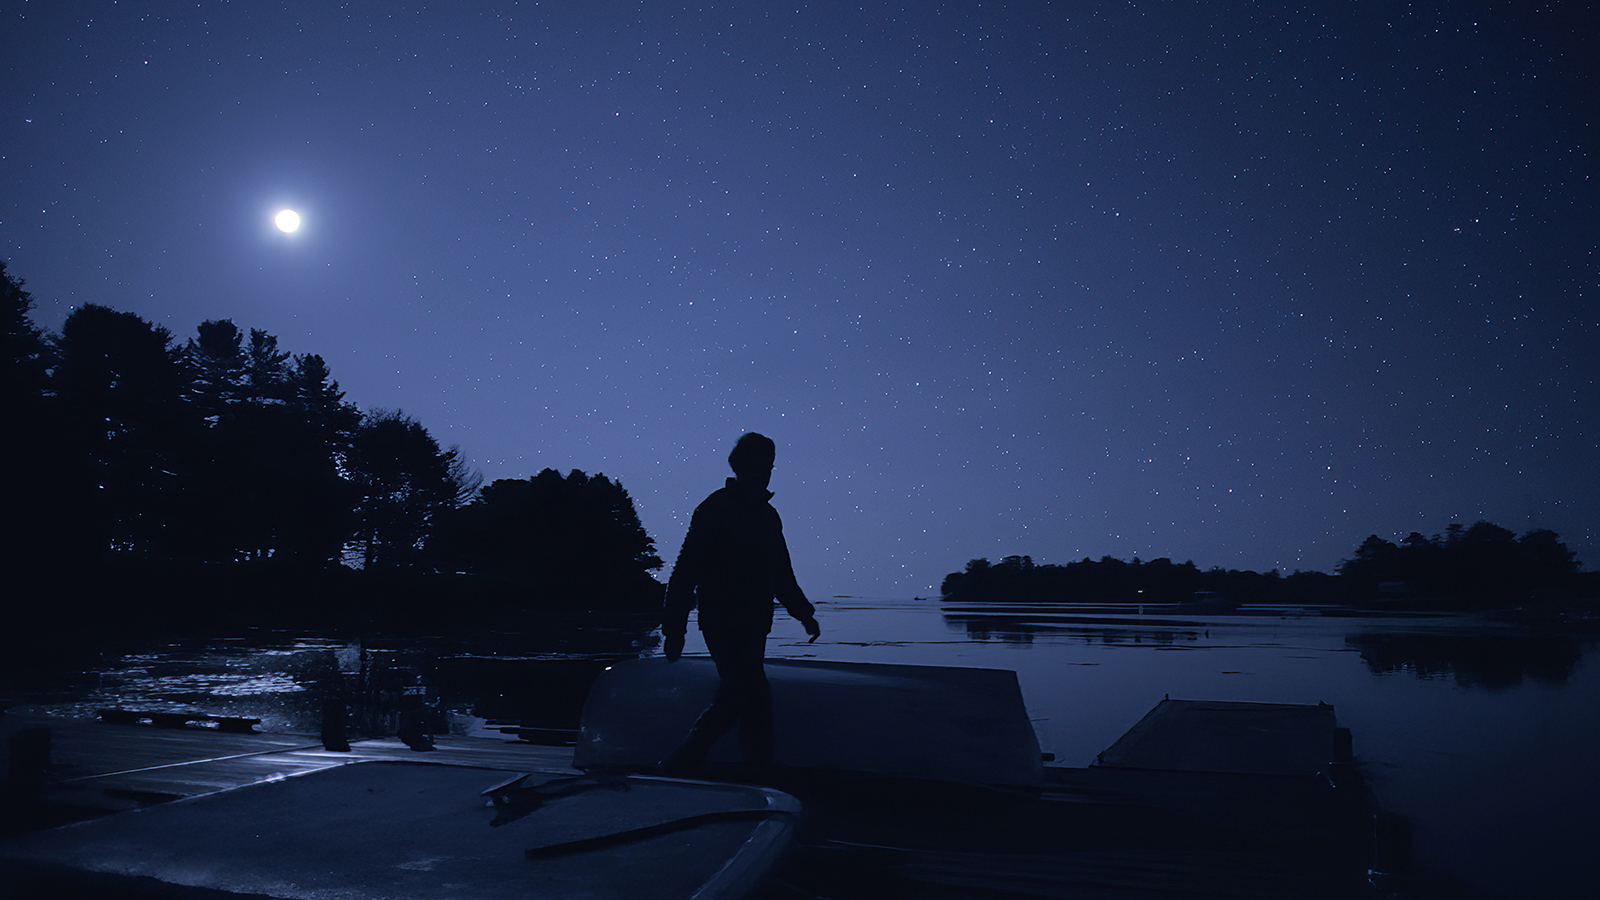 Alone, at night, on a boat, Alan Lightman feels himself merging with the stars. As a life-long “spiritual materialist” he sets off to look for answers in "SEARCHING: Our Quest for Meaning in the Age of Science." Photo courtesy of SEARCHING